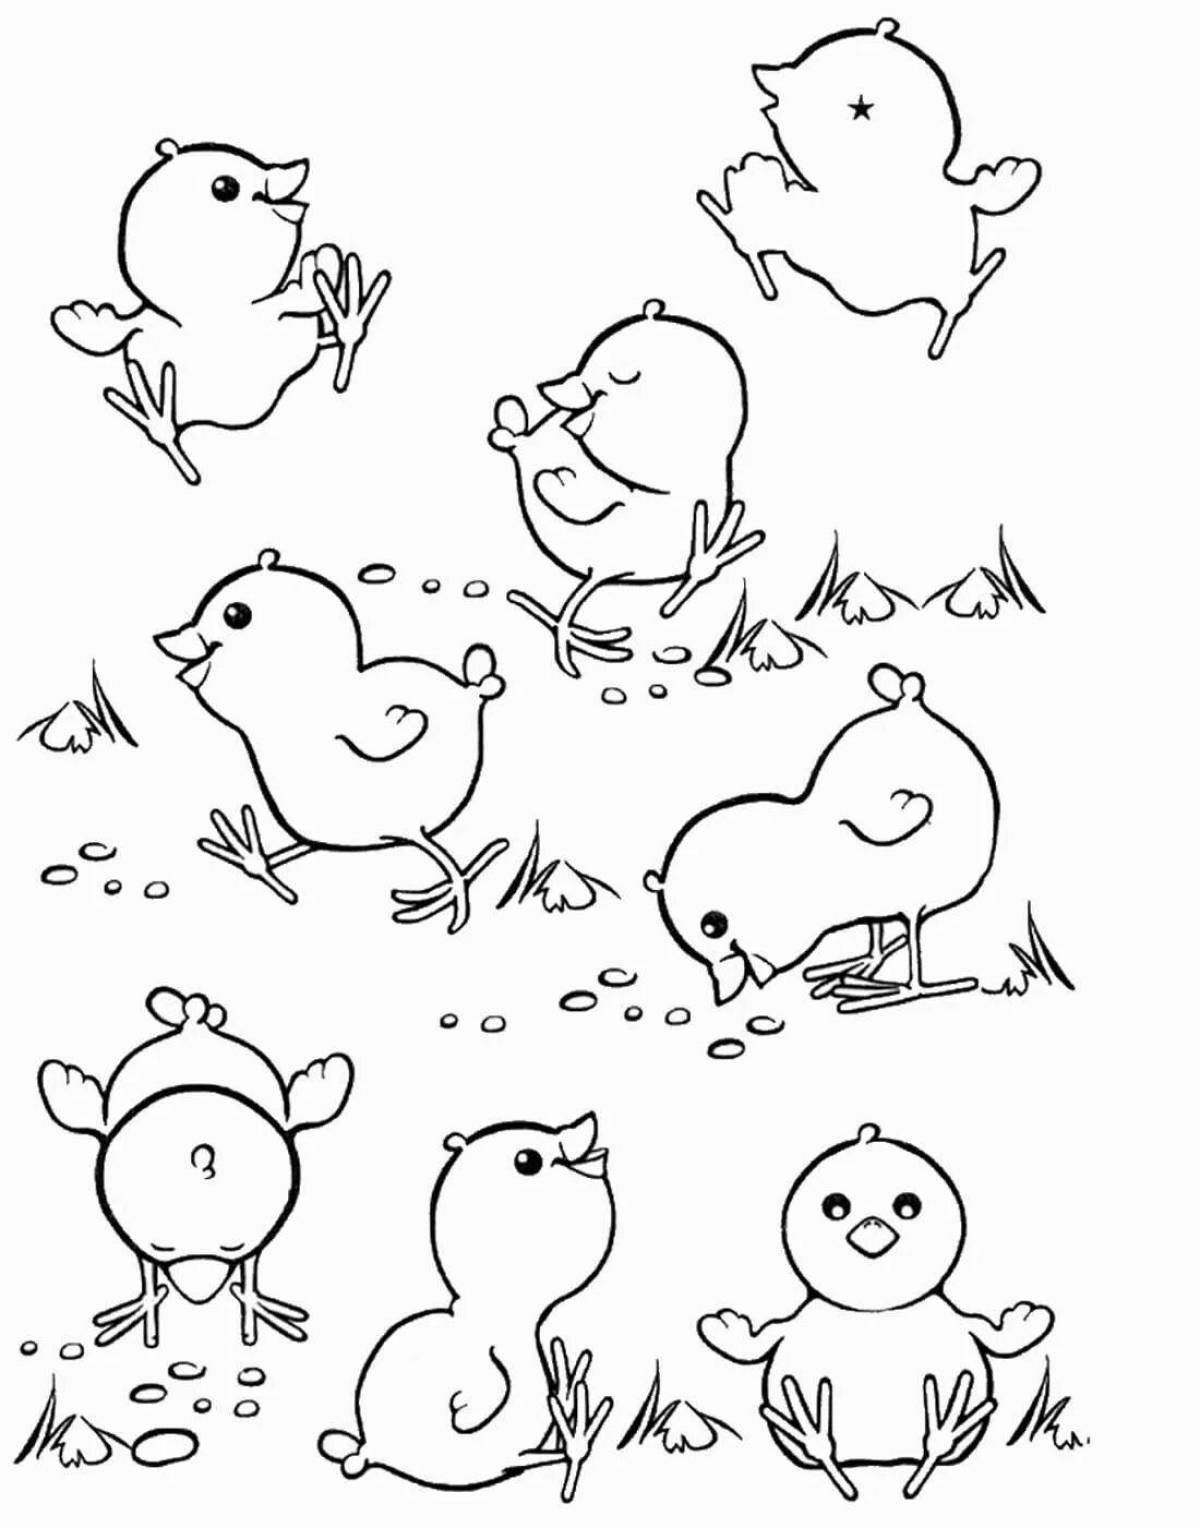 Rampant chickens coloring pages for 6-7 year olds